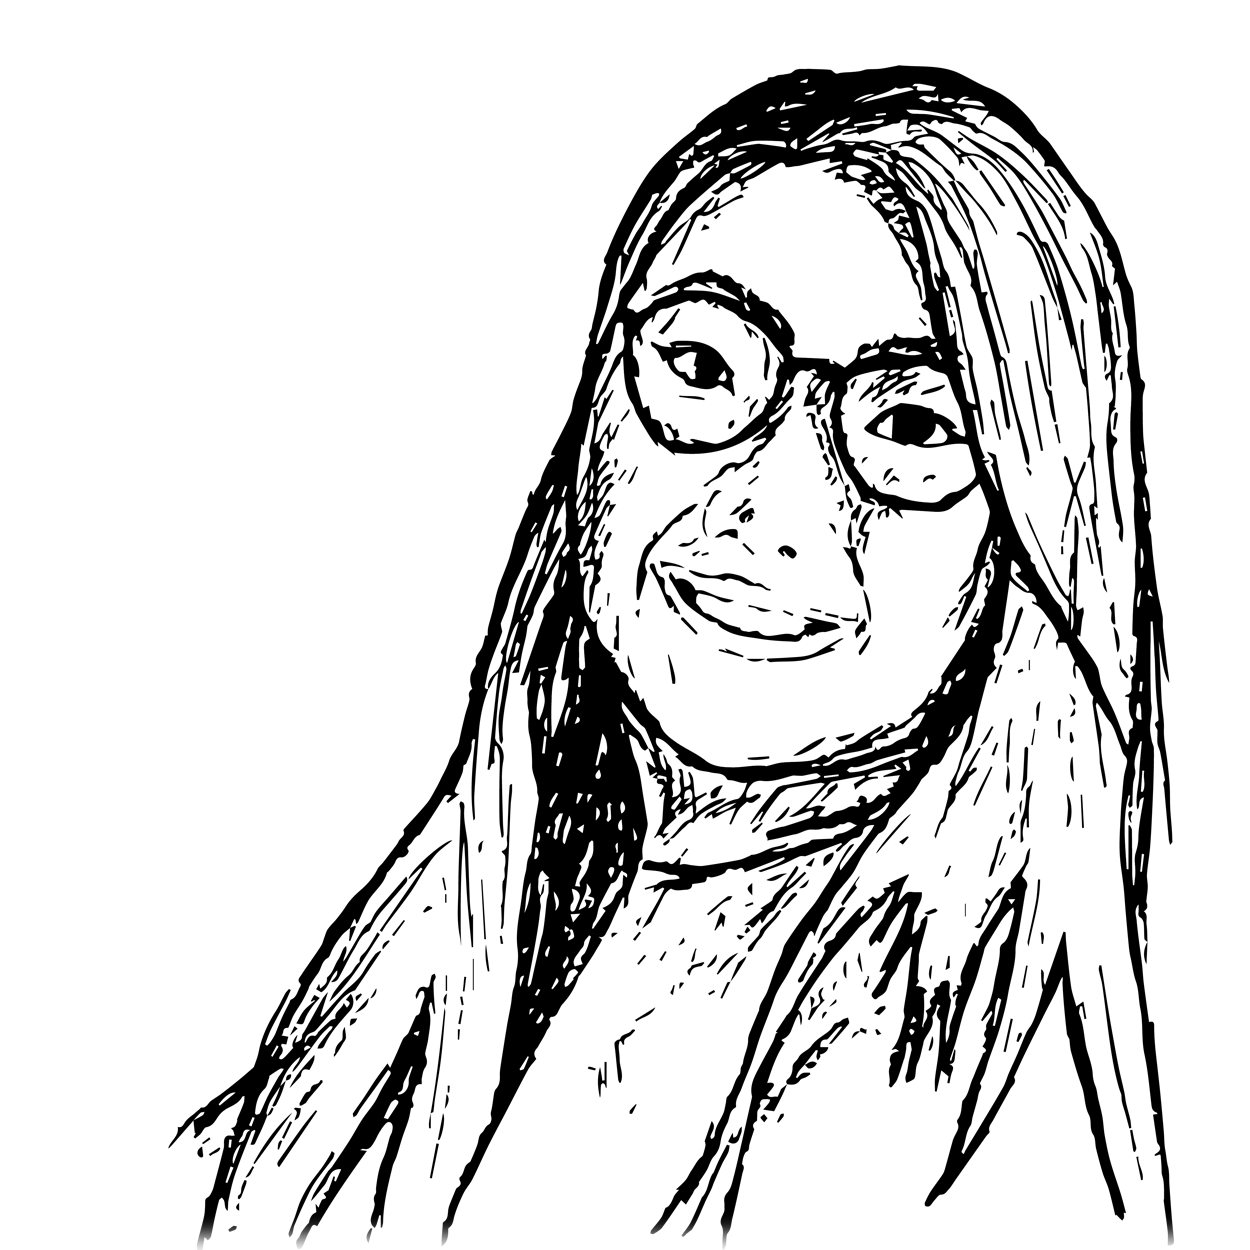 A drawing of a young Asian woman with glasses smiling at the camera